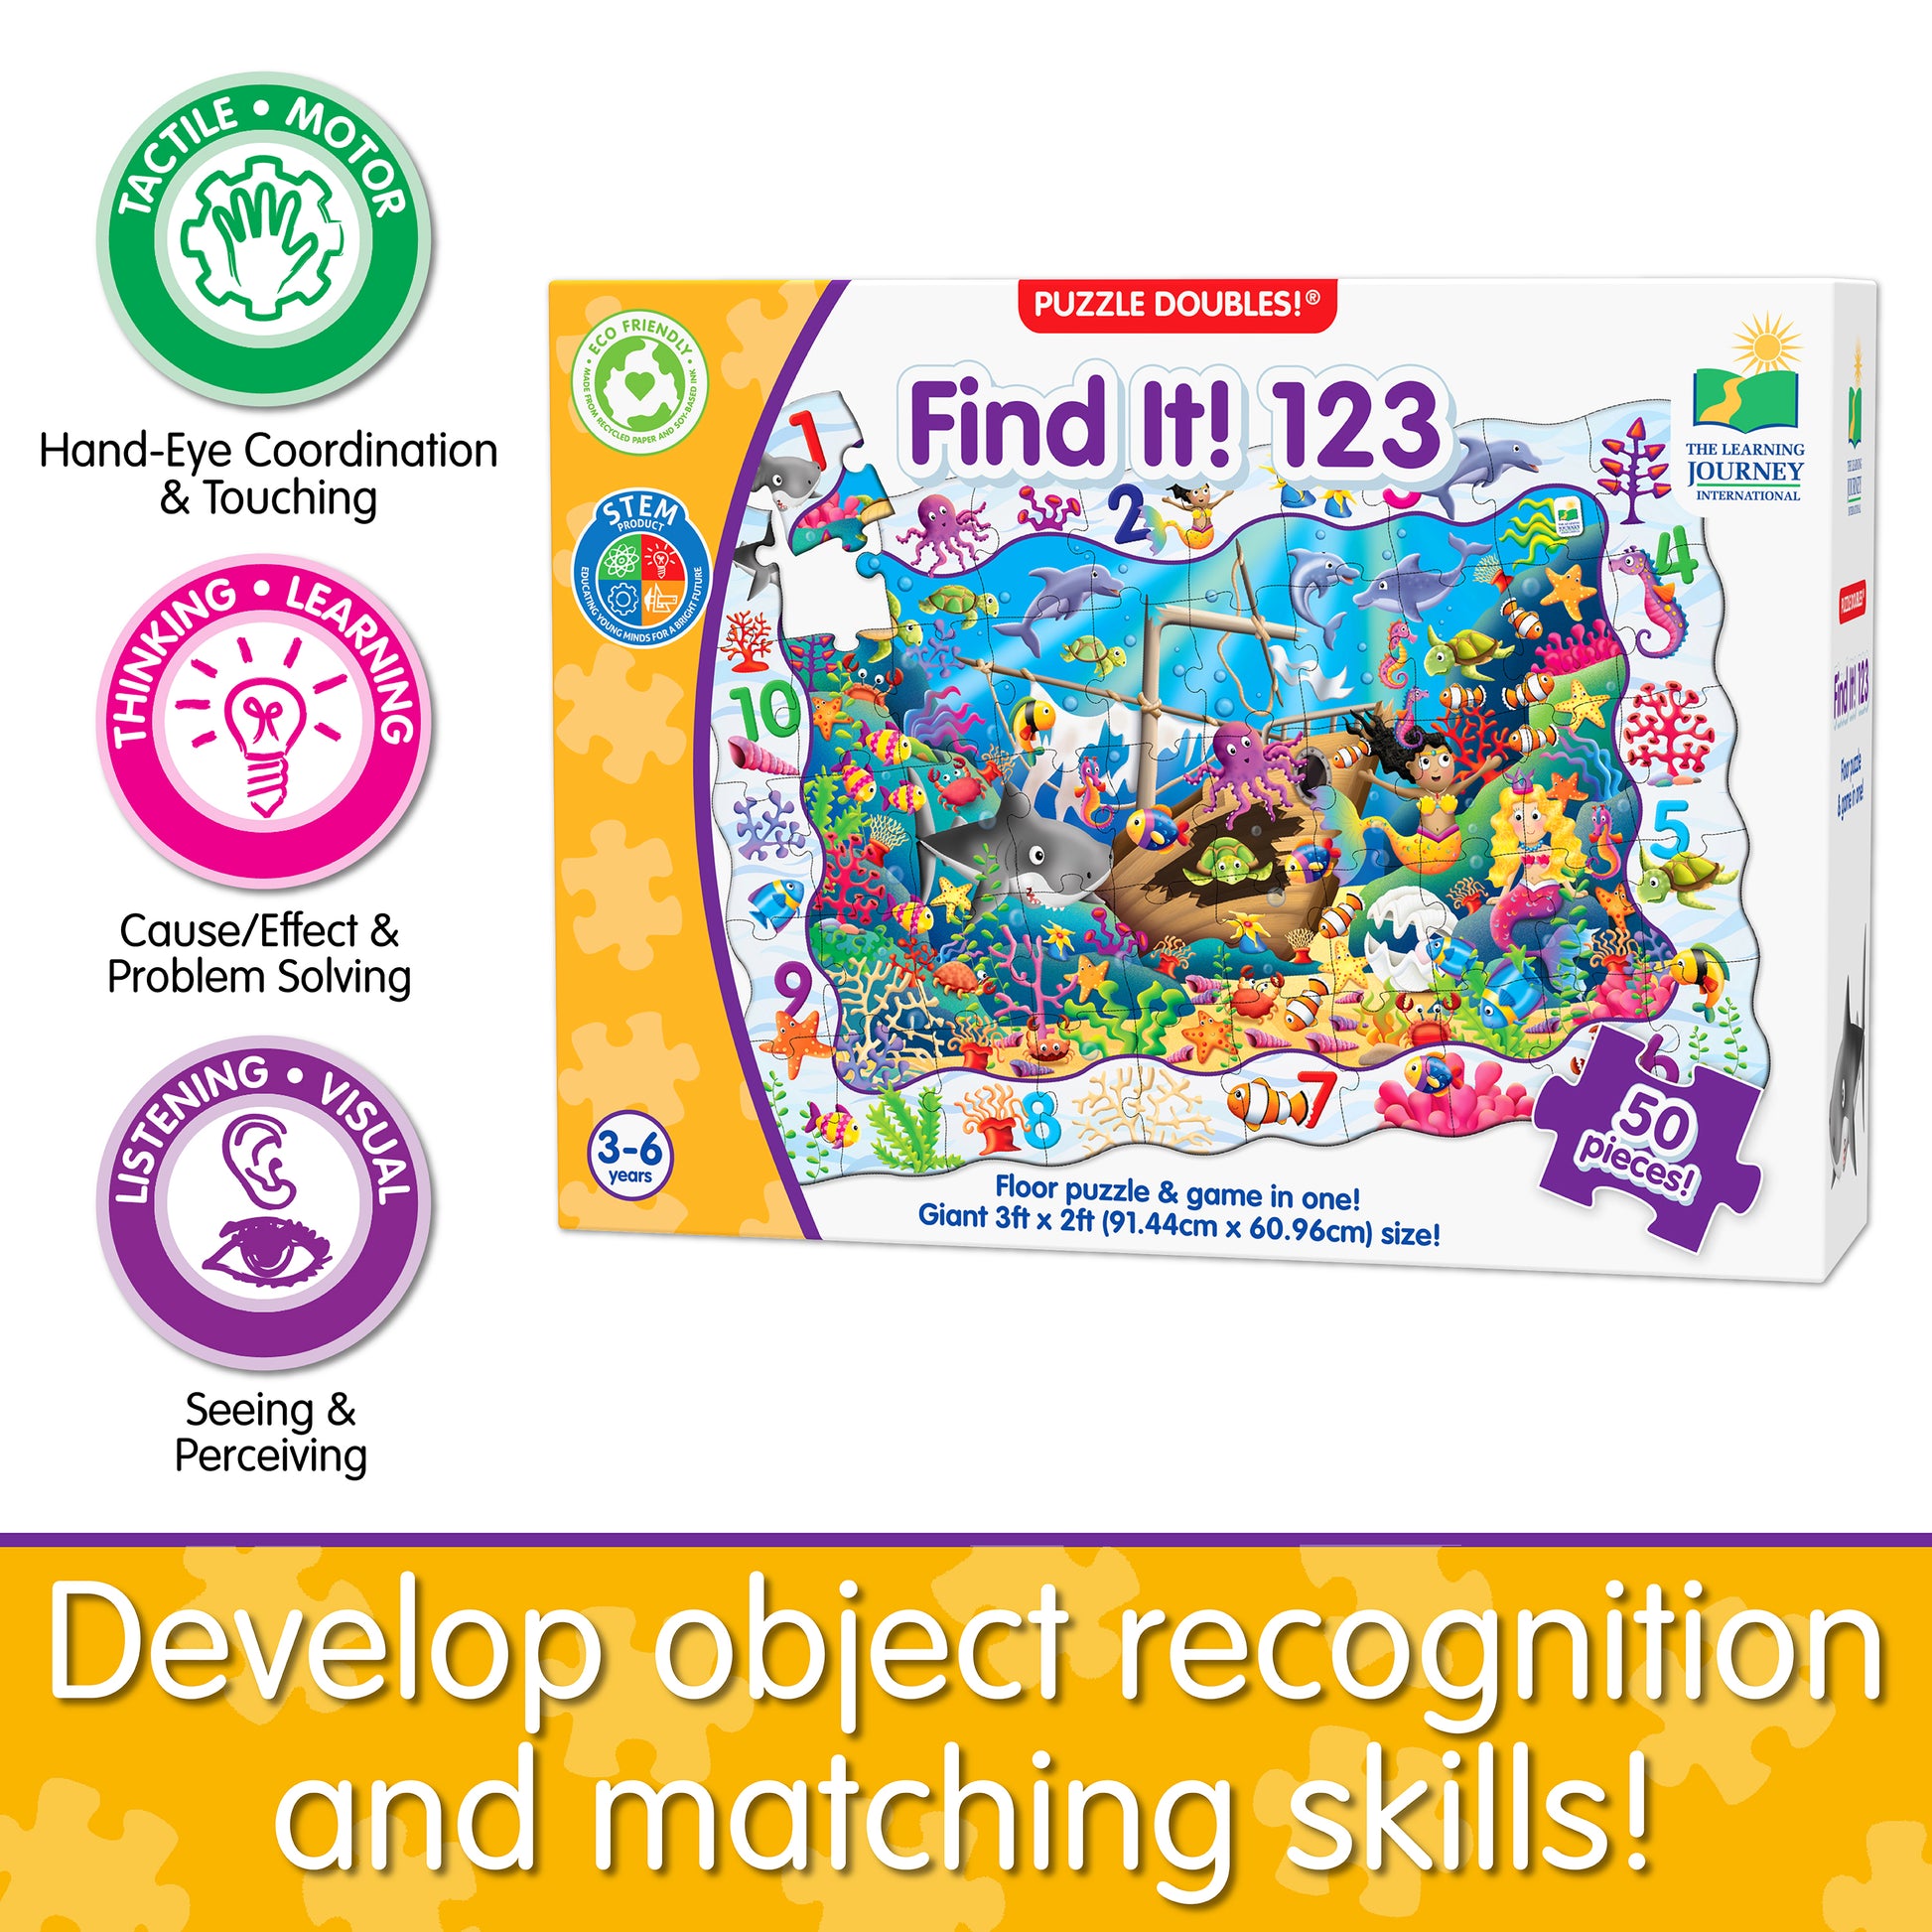 Infographic about Find It - 123's educational benefits that says, "Develop object recognition and matching skills!"